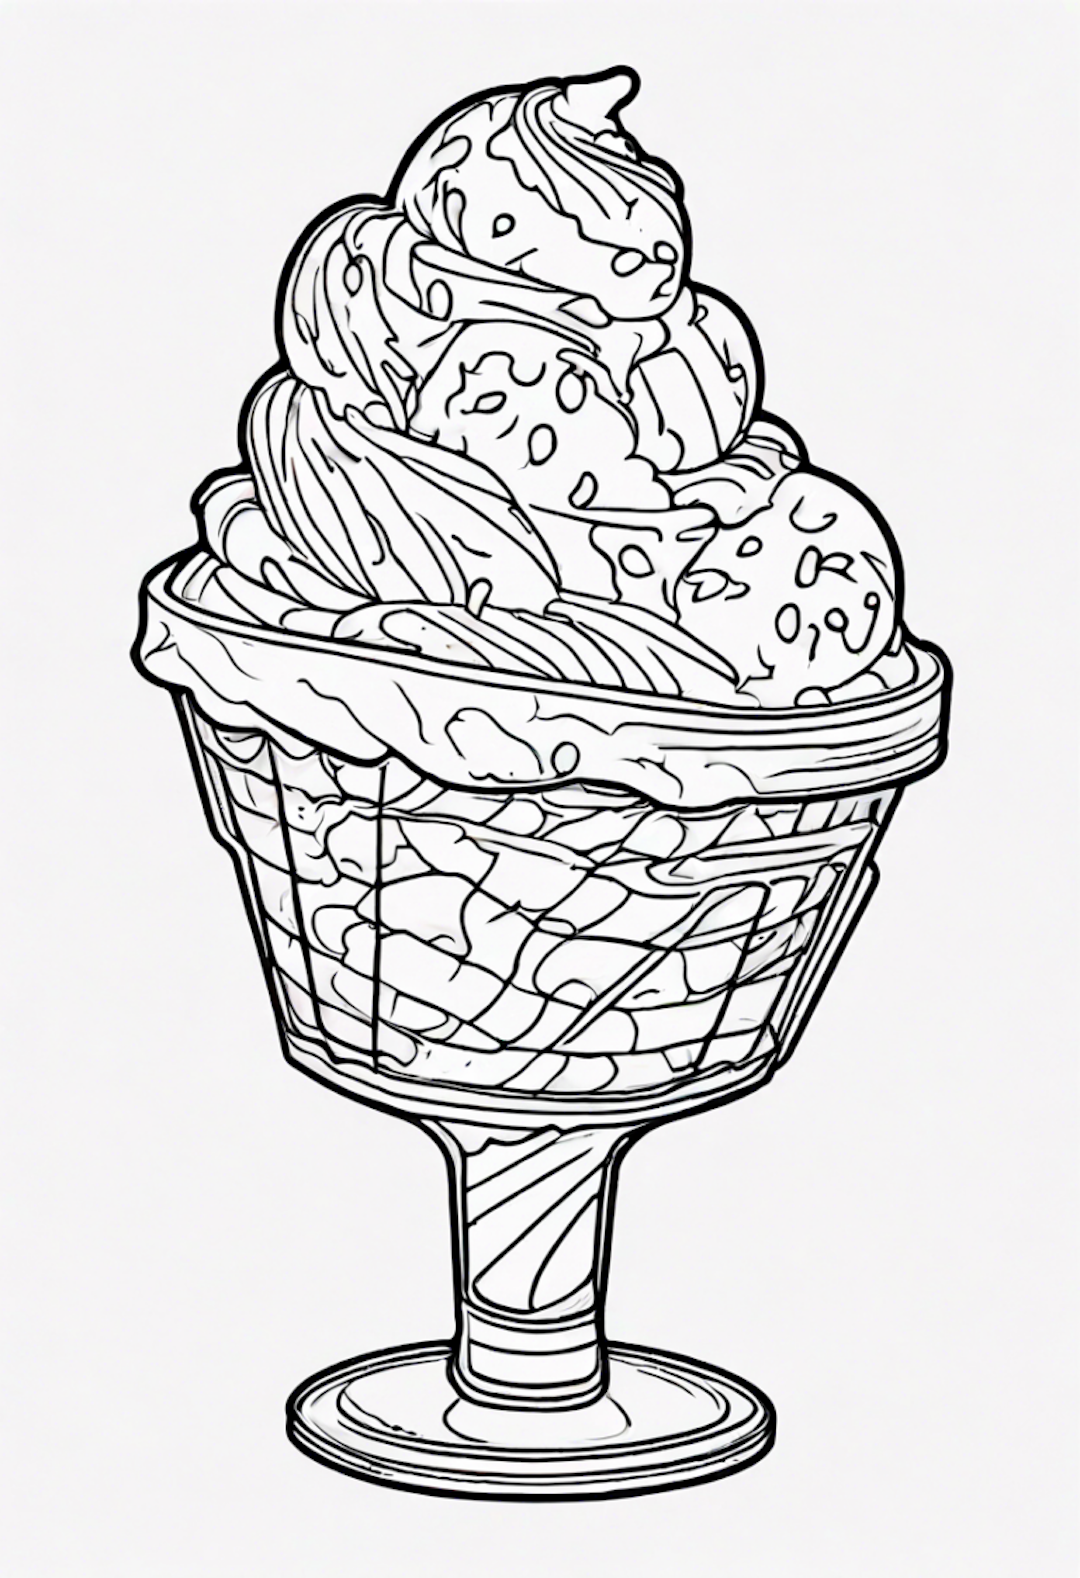 Ice Cream Sundae Coloring Page coloring pages